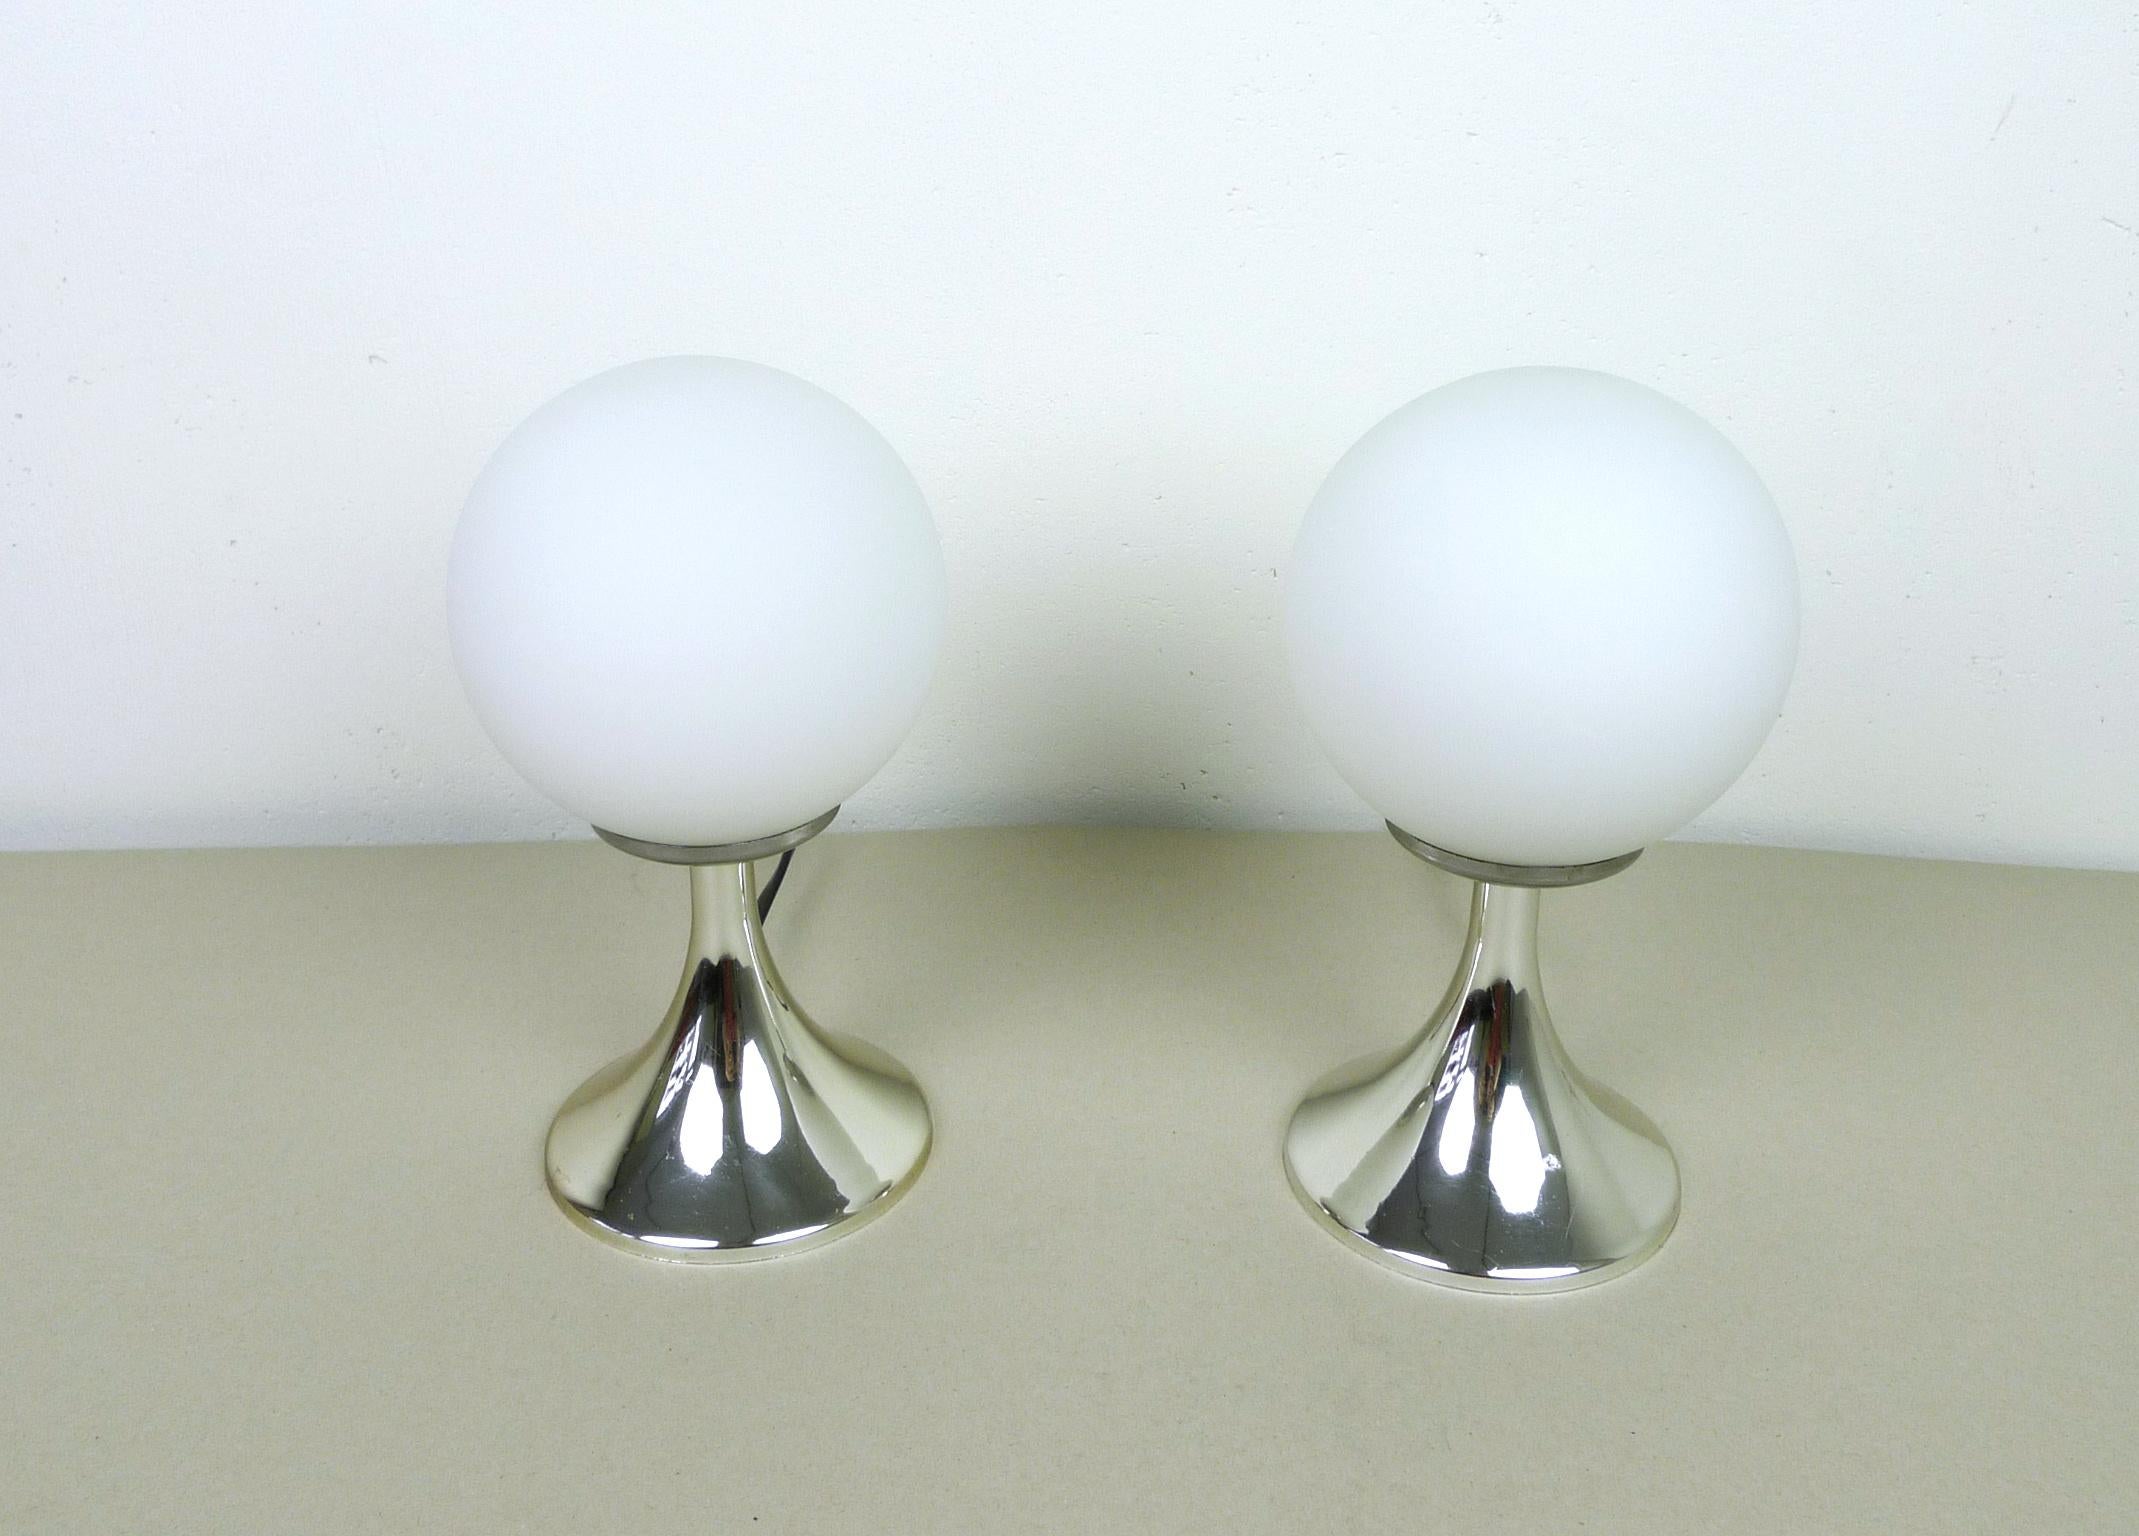 Pair of table lamps with white opal glass globes and chromed tulip bases made of plastic. Each one has a E 14 bulb socket inside. They were produced in Germany in the 1960s and they are in good condition.